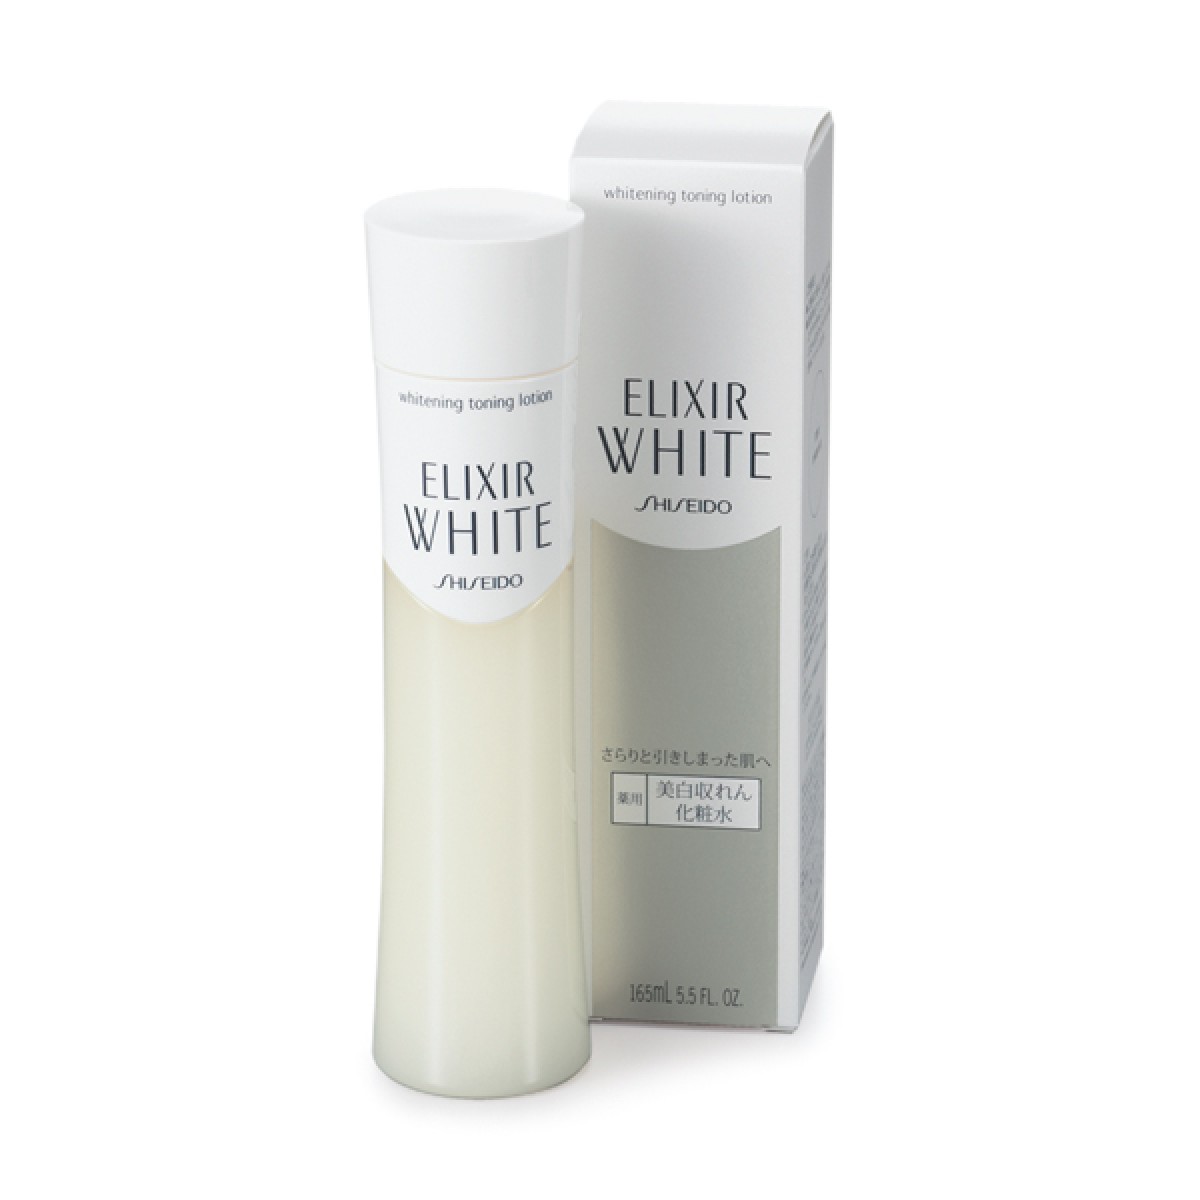 Dưỡng Ngày Elixir White Whitening Clear Emulision